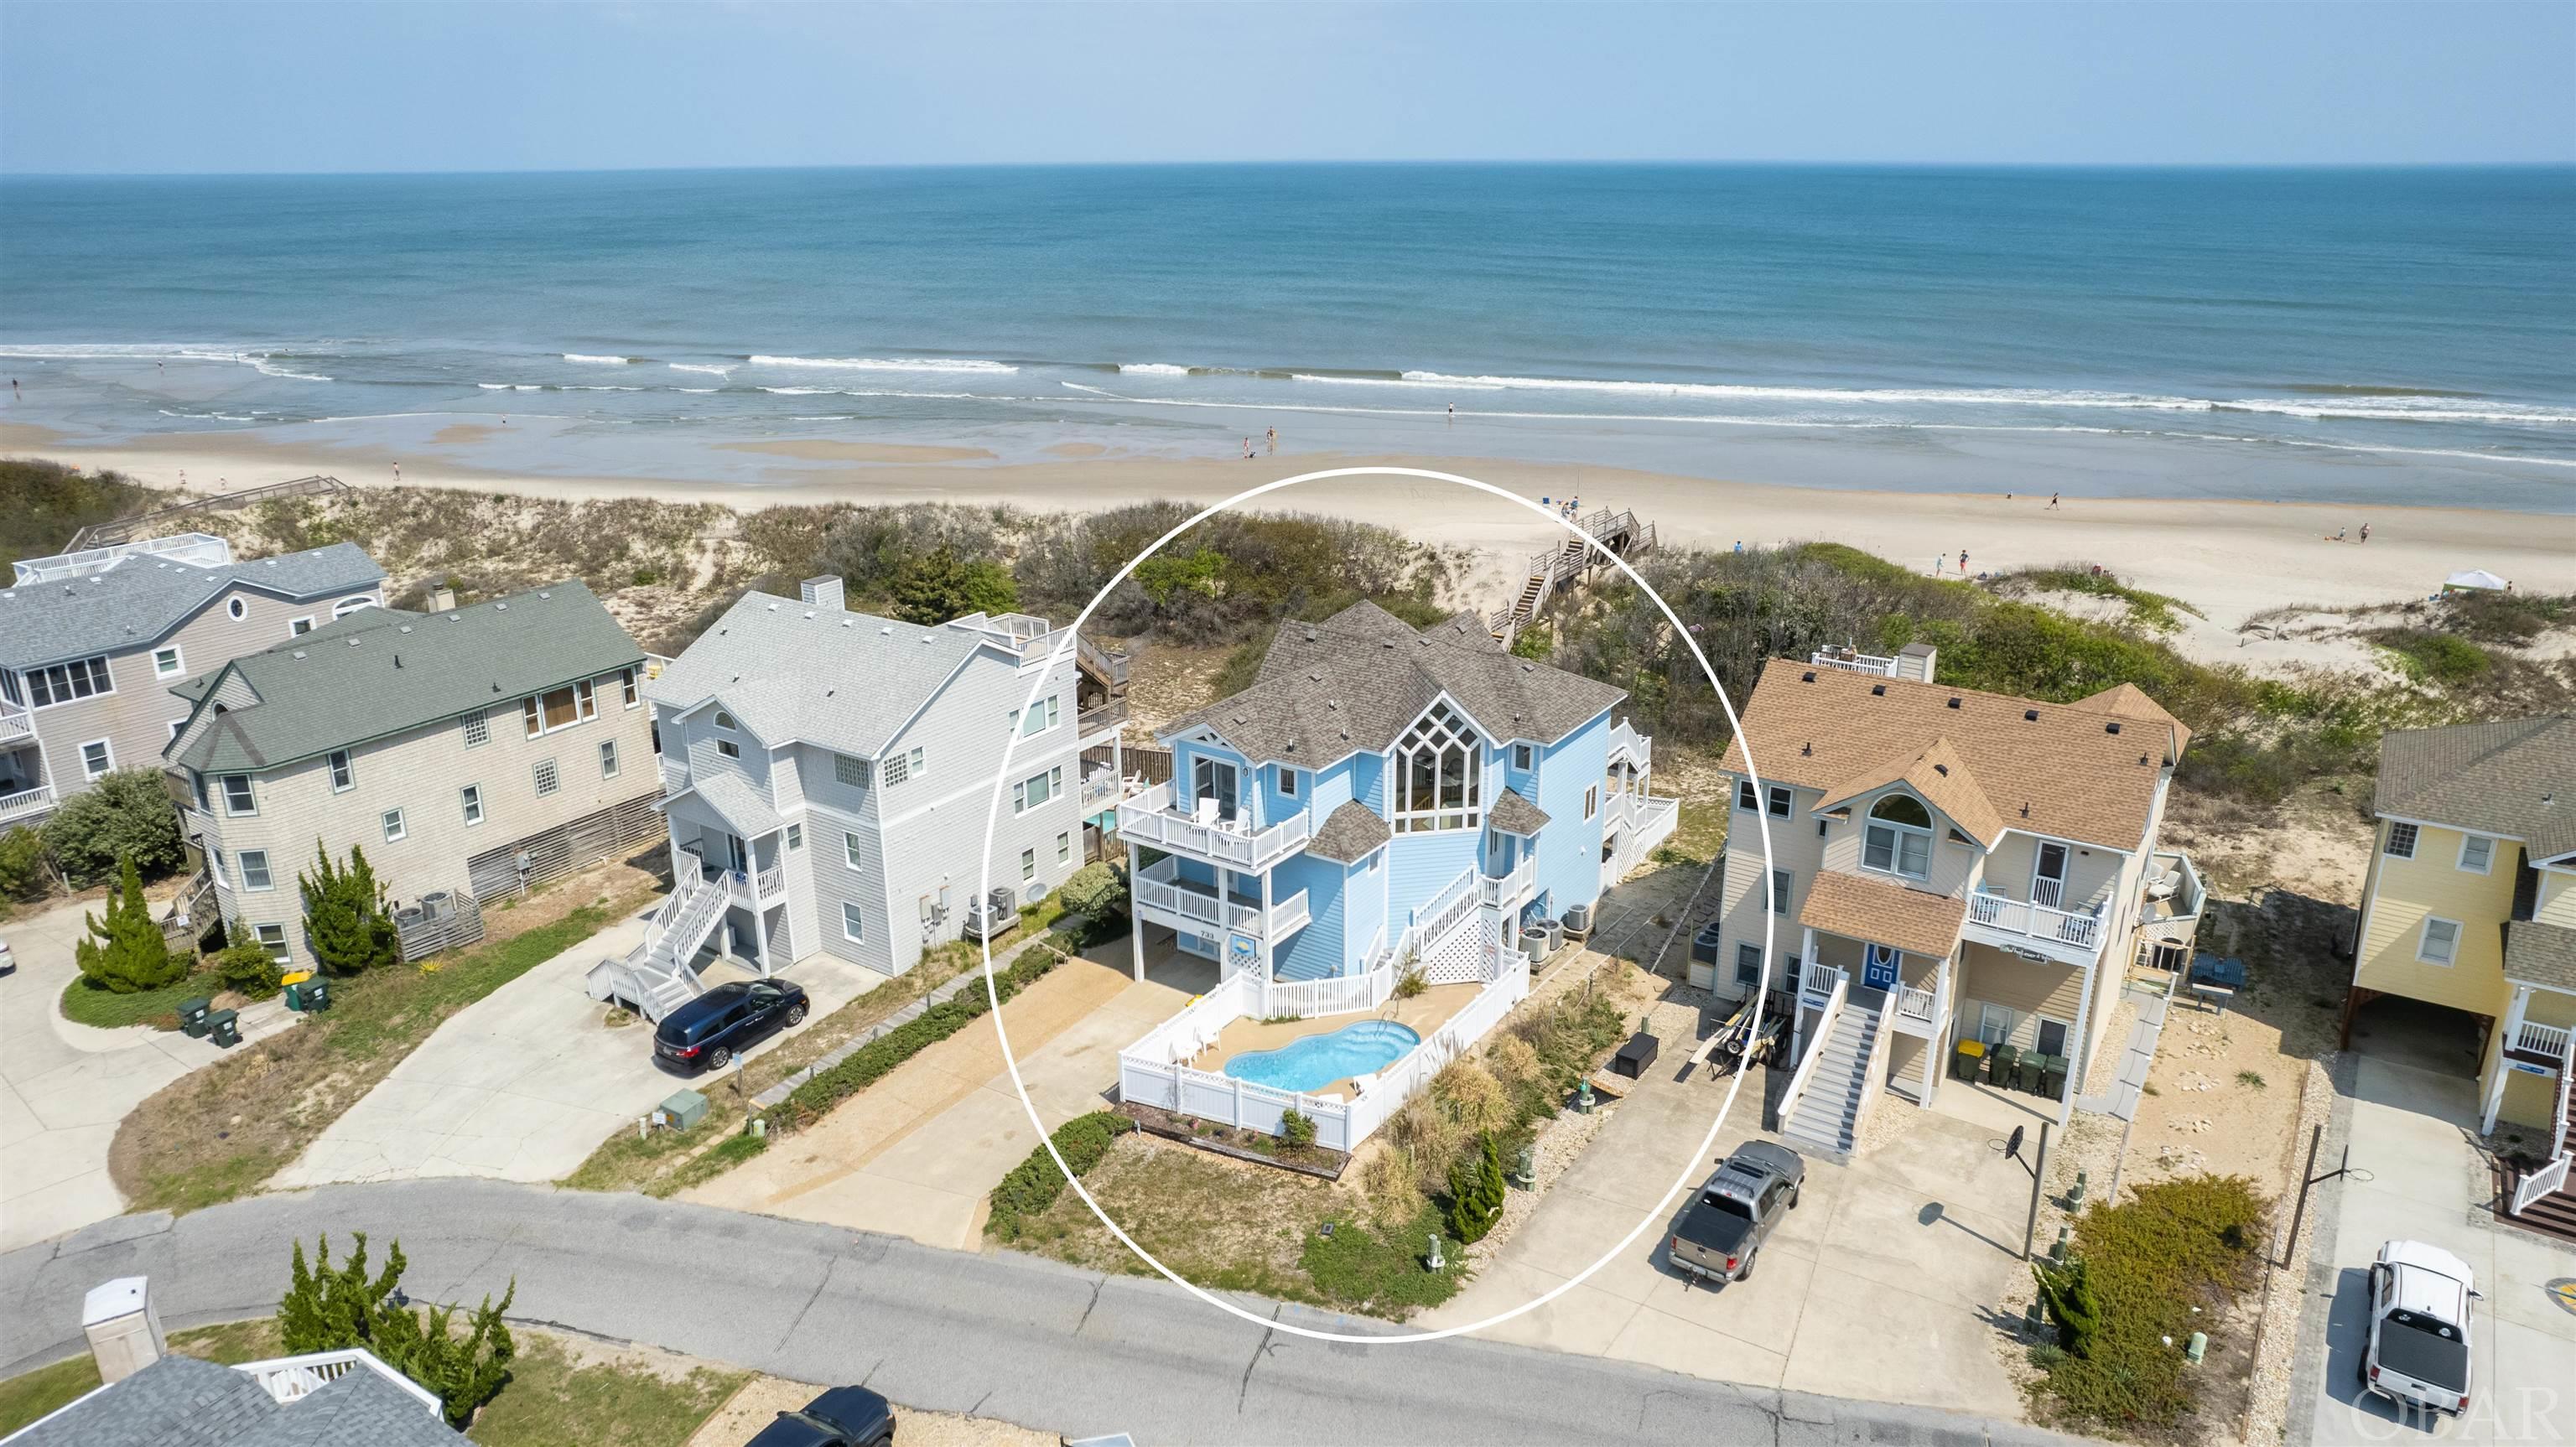 733 Crown Point Circle, Corolla, NC 27927, 6 Bedrooms Bedrooms, ,5 BathroomsBathrooms,Residential,For sale,Crown Point Circle,121897